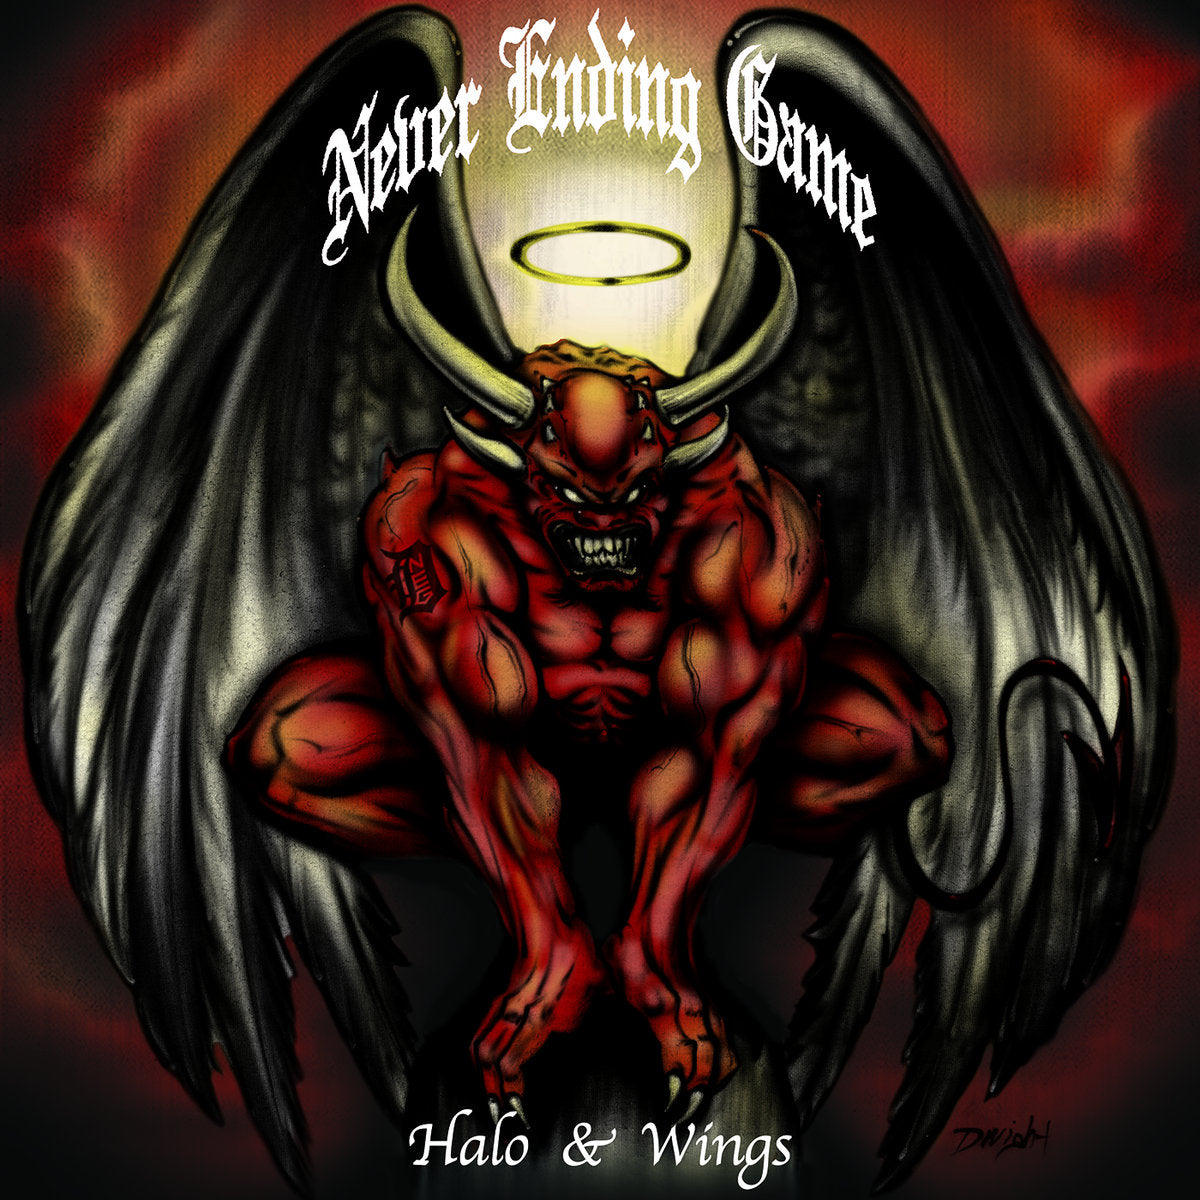 Never Ending Game "Halo & Wings"  7"